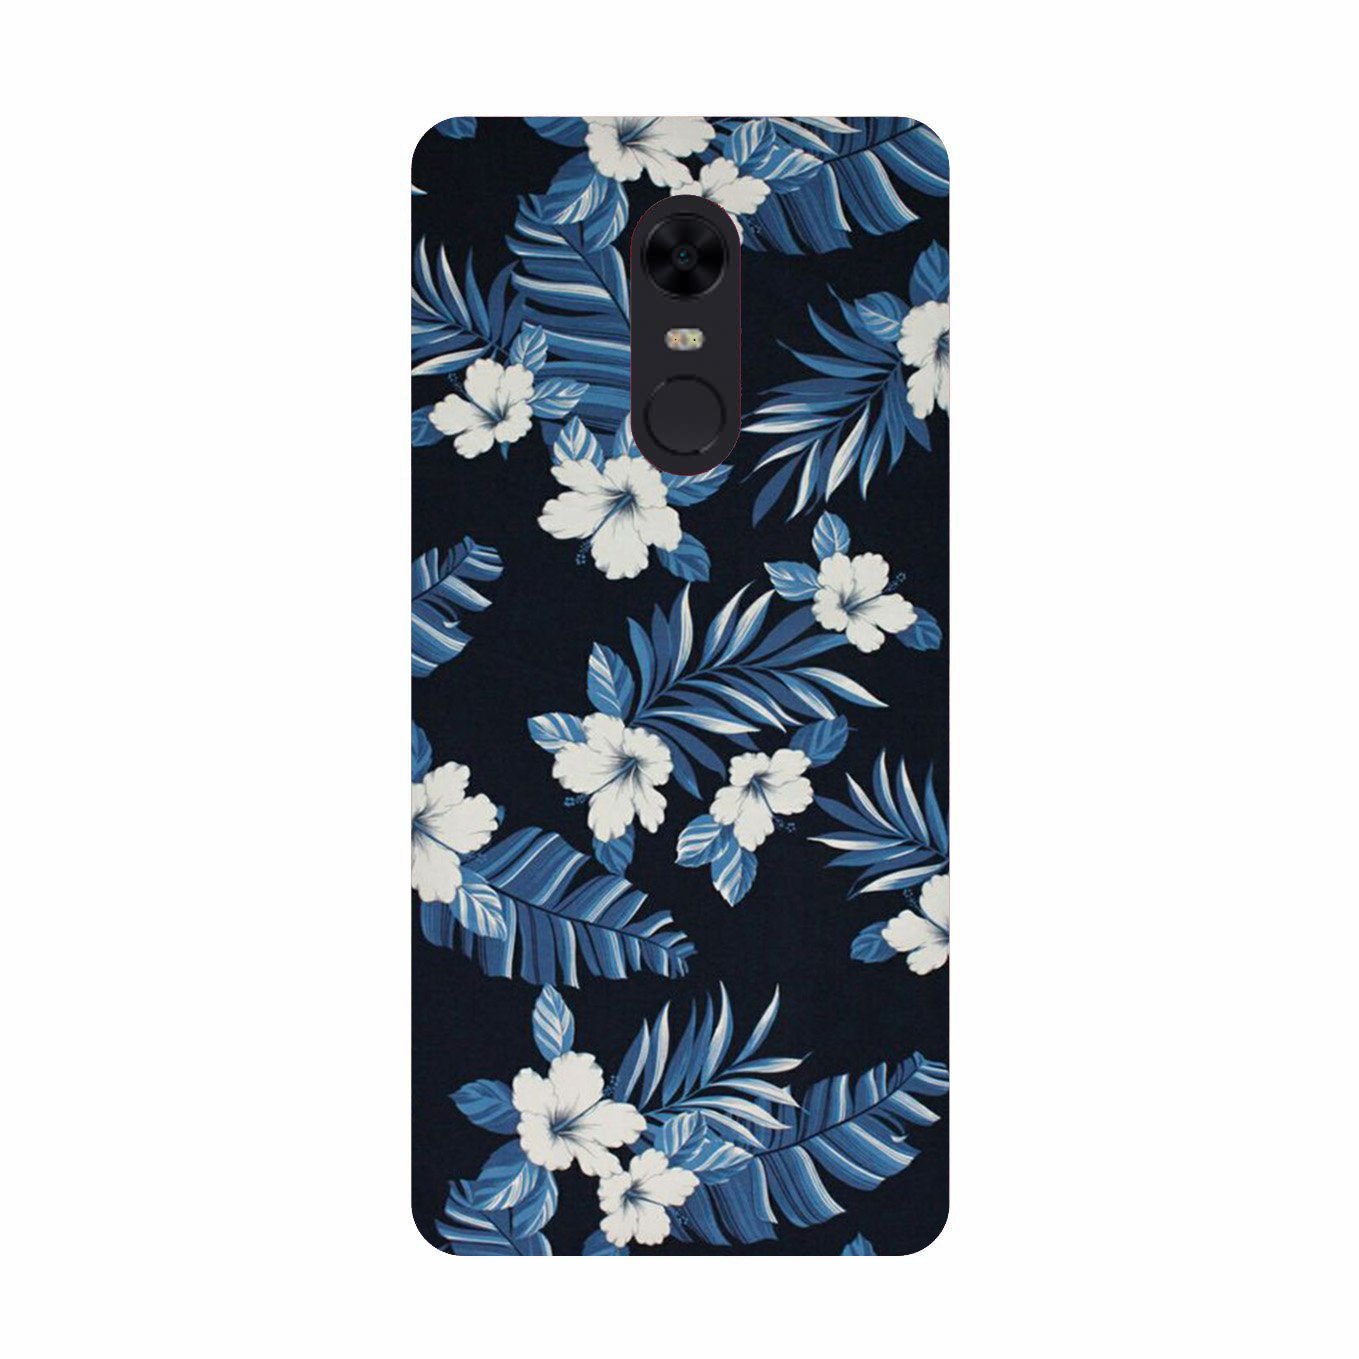 White flowers Blue Background2 Case for Redmi 5